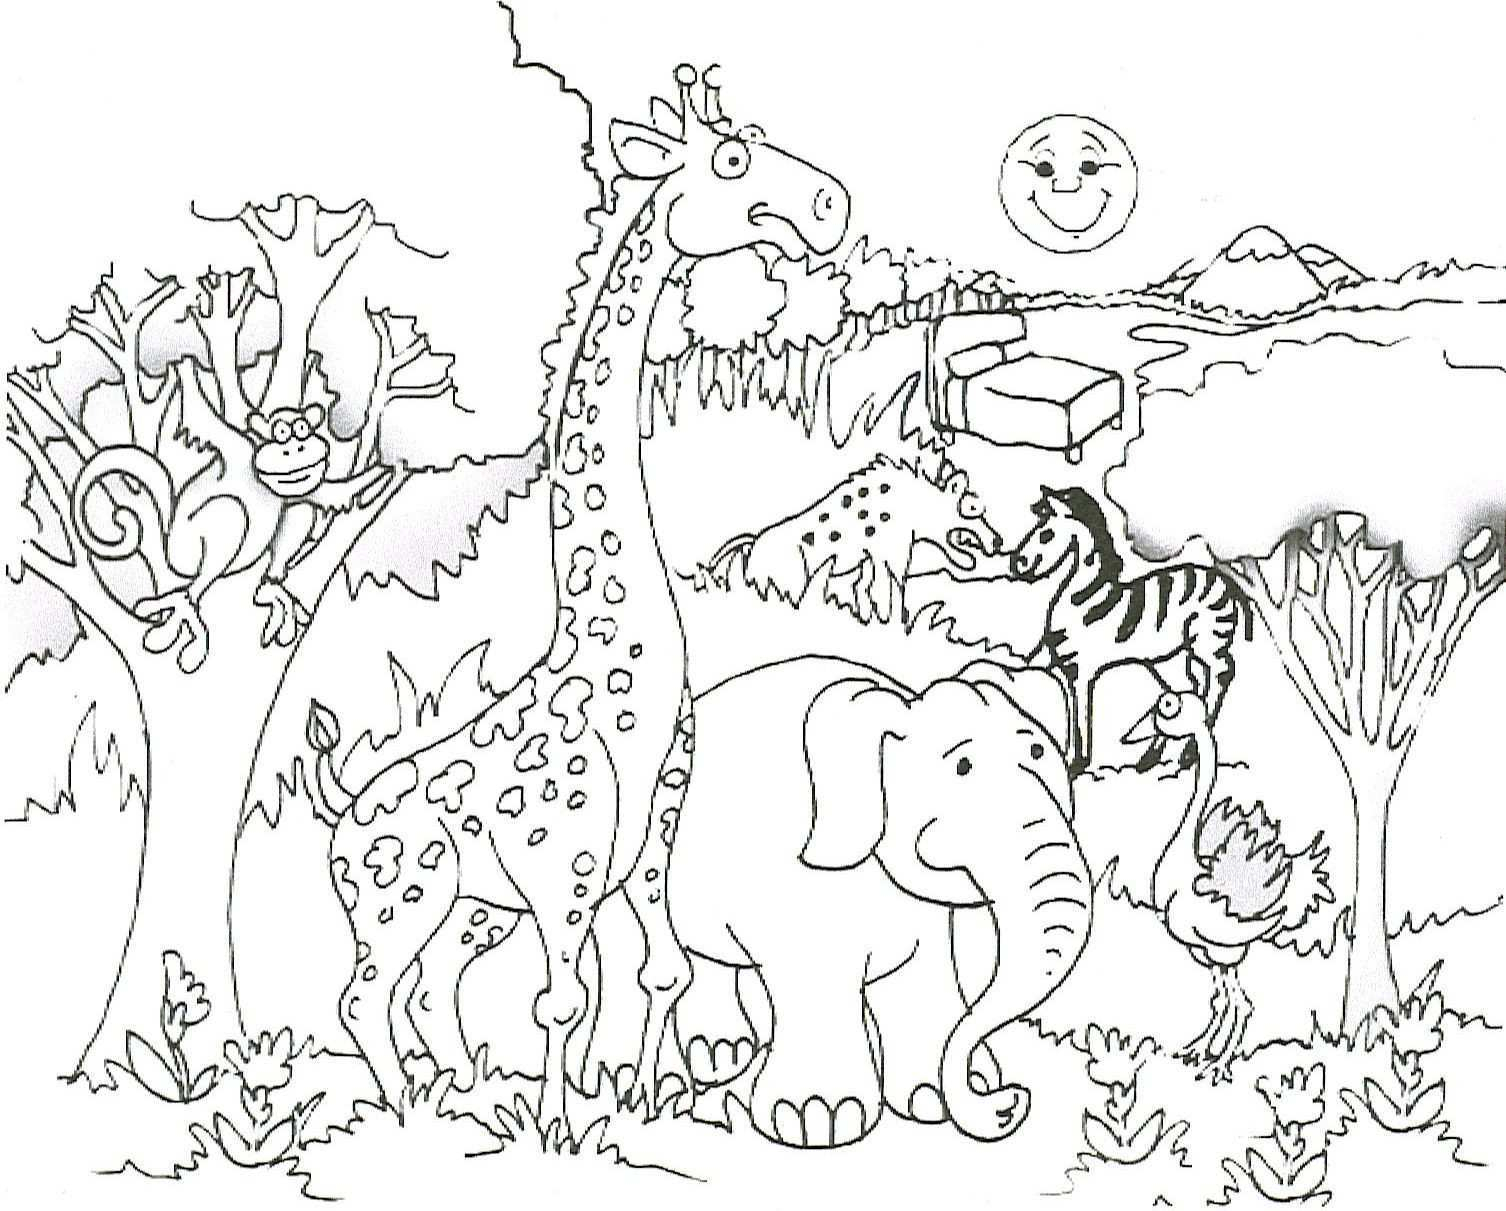 Animals In The Rainforest Coloring Pages Coloring Pages 32 Rainforest Animals Coloring Pages Picture Ideas